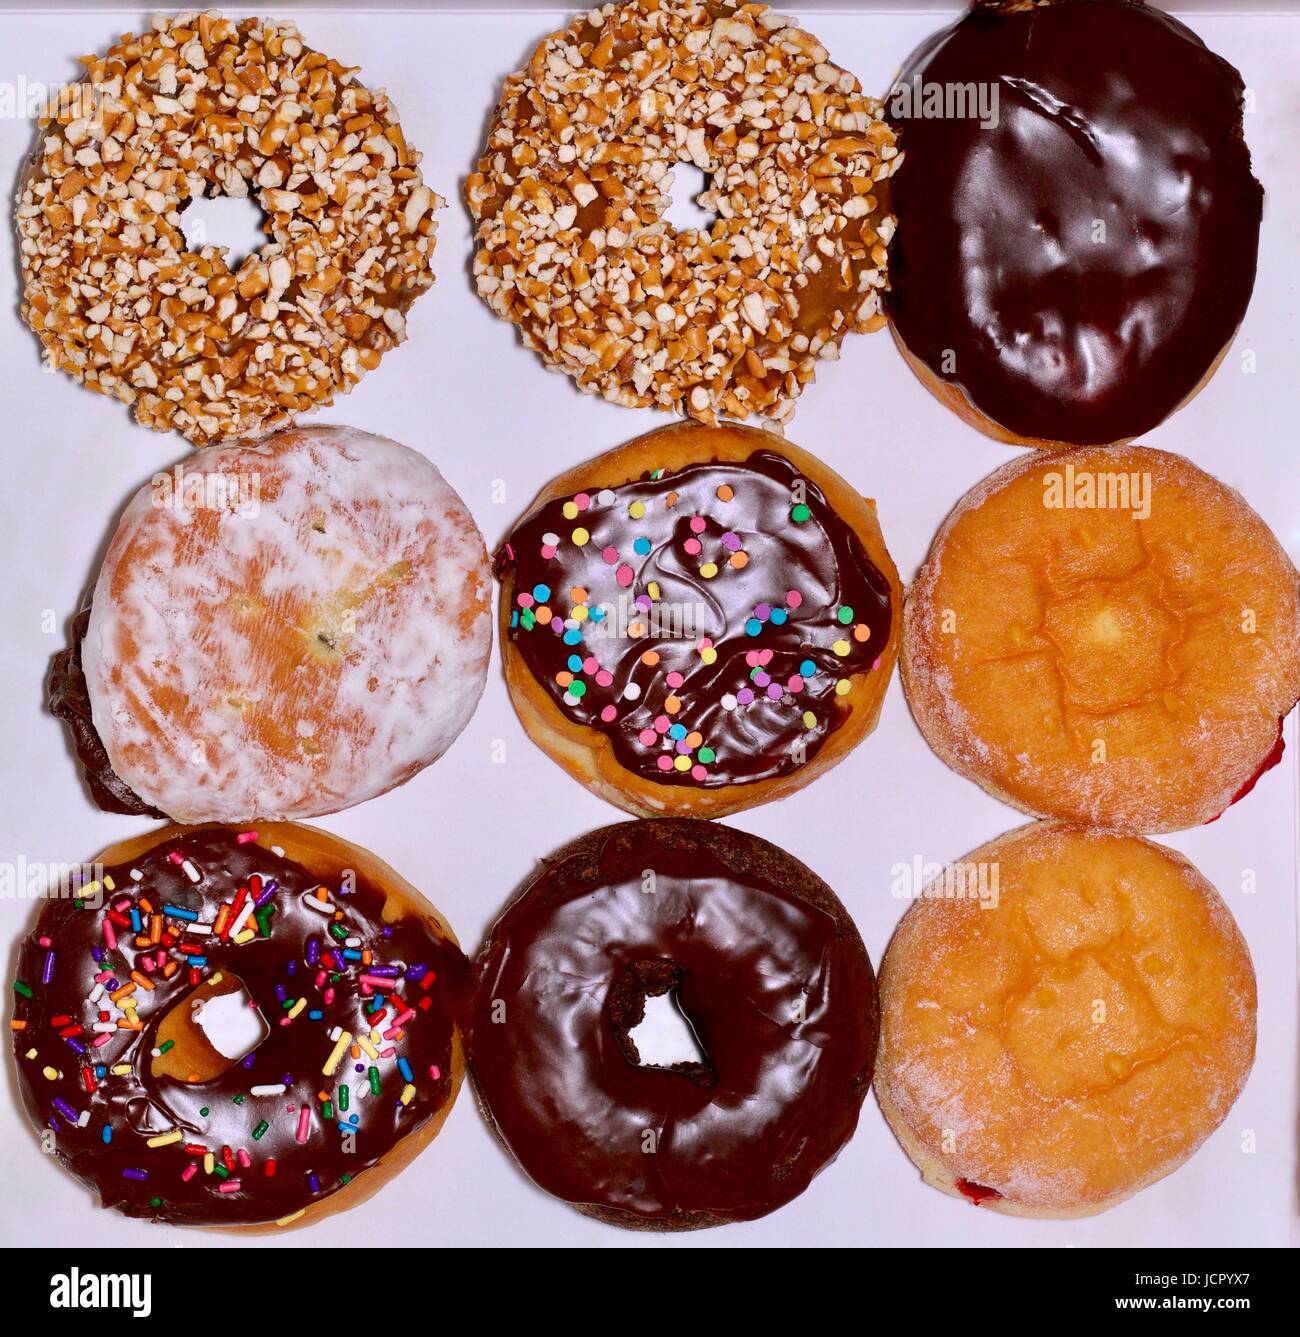 Nine fancy doughnuts on a white background Stock Photo